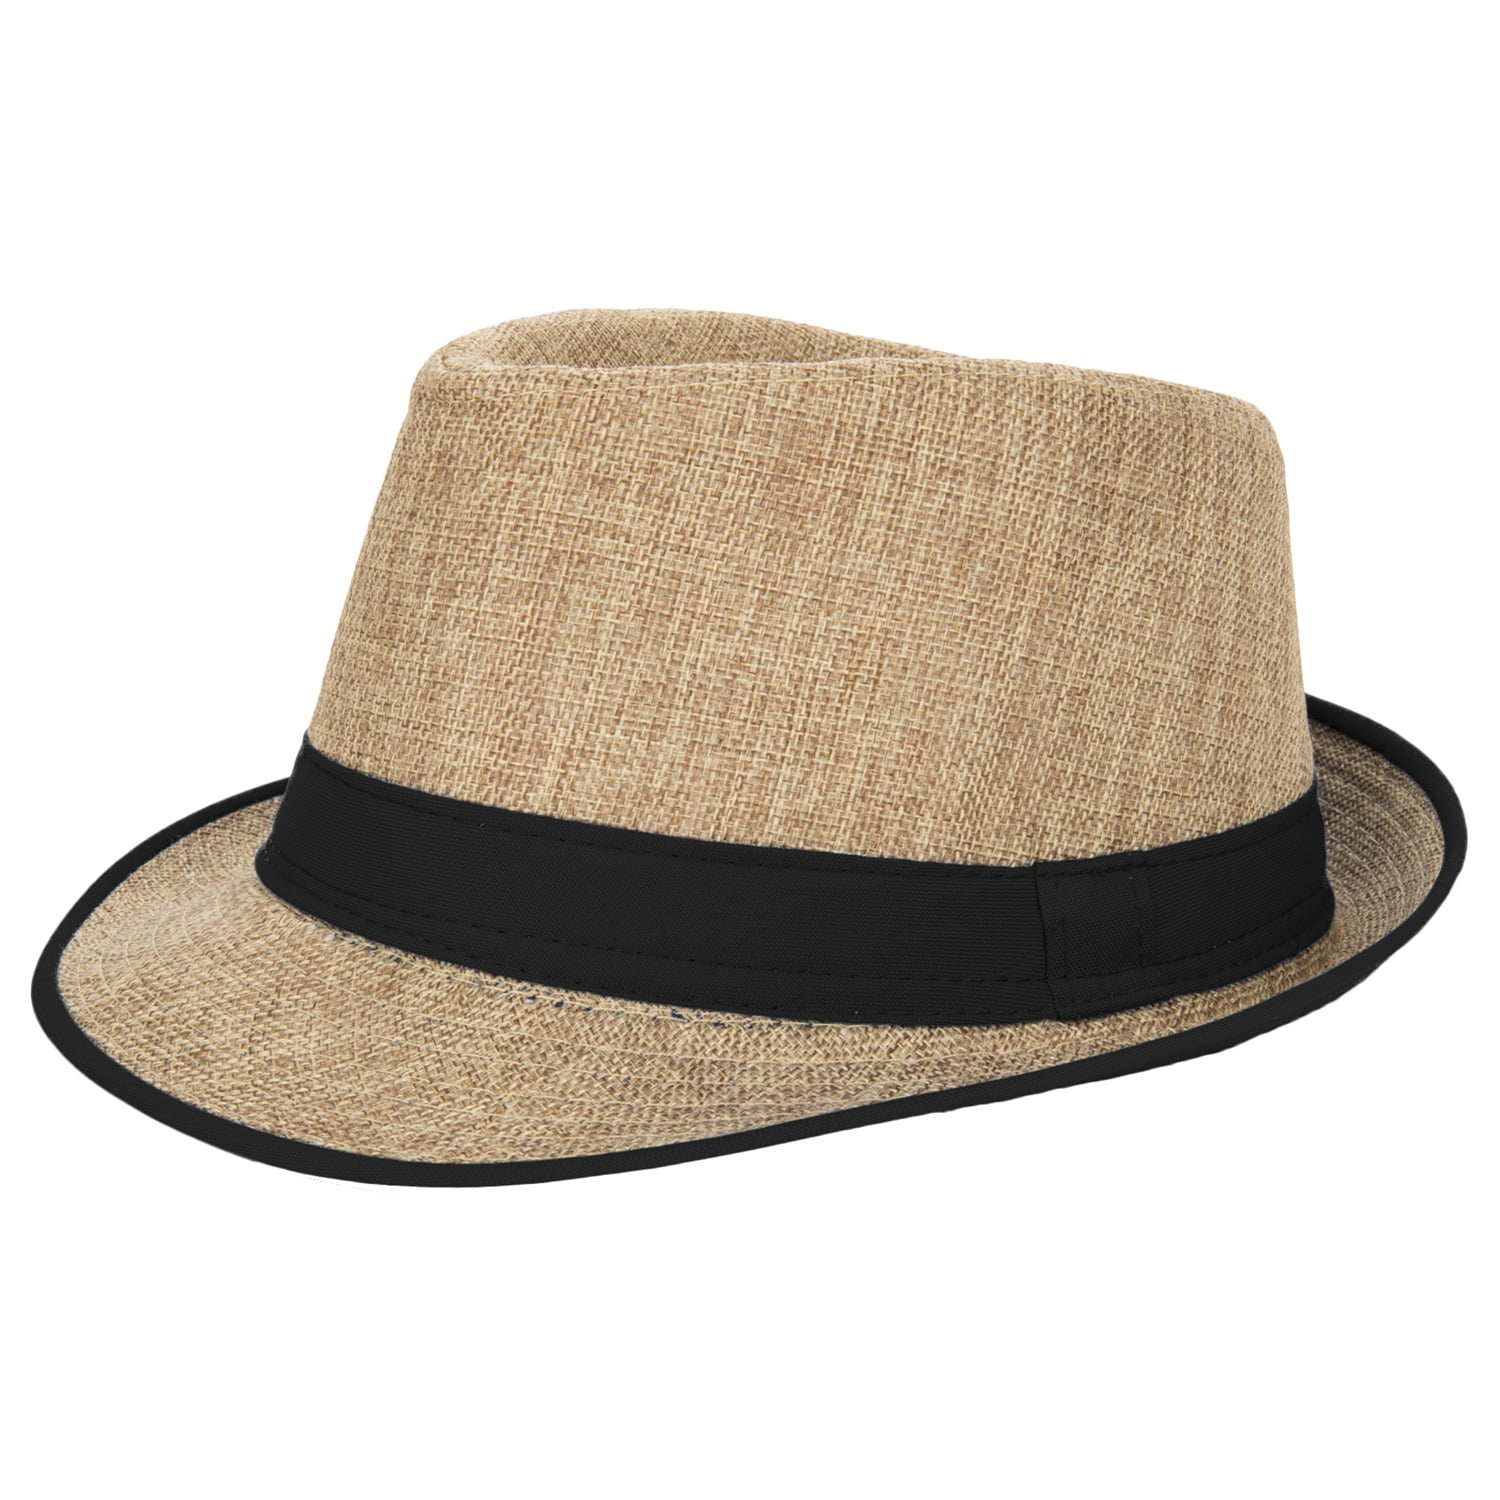 Black Trilby Fedora Straw Hat For Outdoors, Vacation, Spring And Summer ...